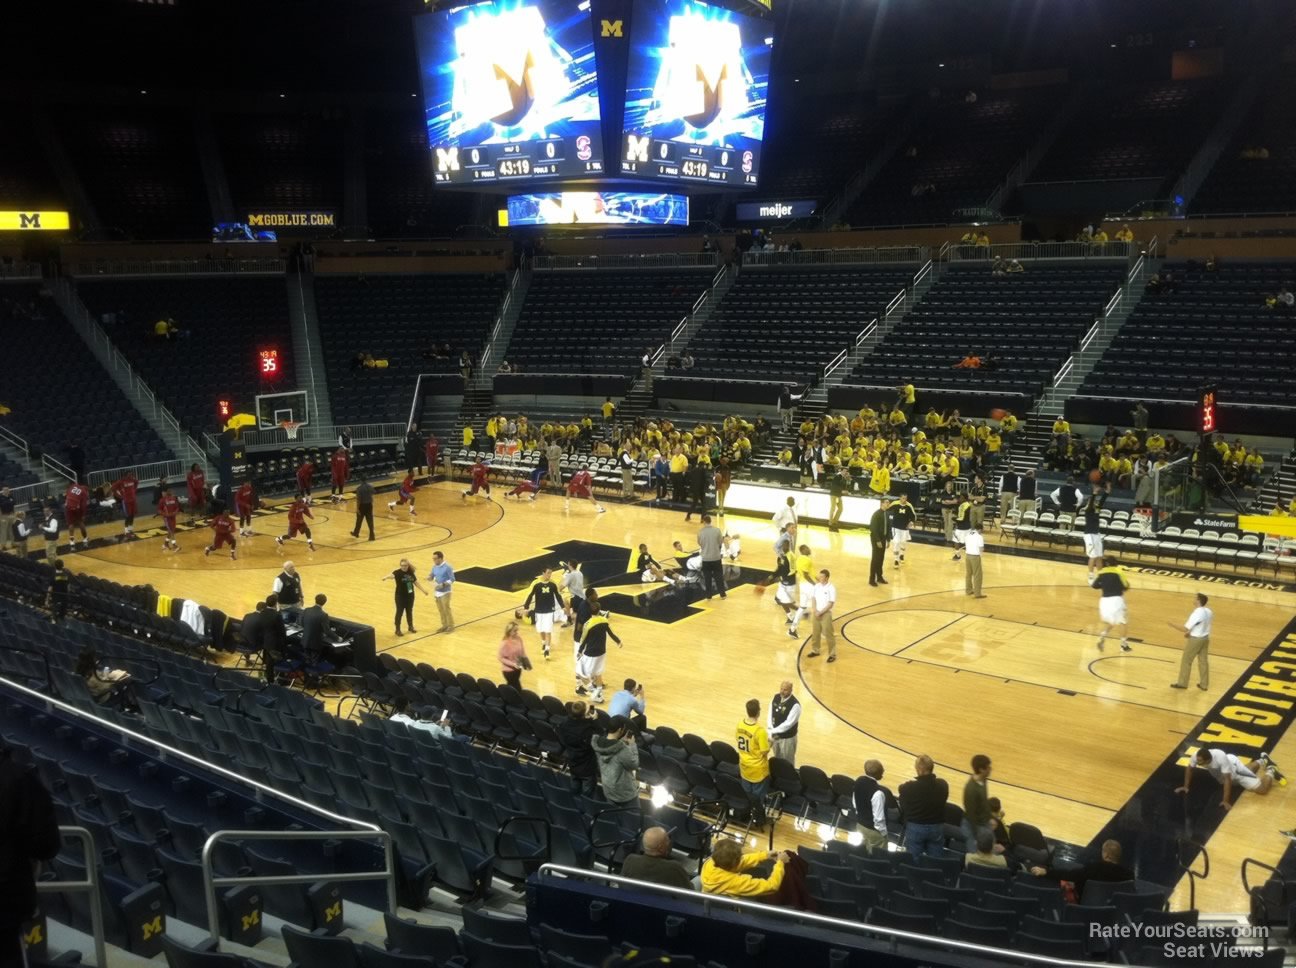 section 101, row 16 seat view  - crisler center